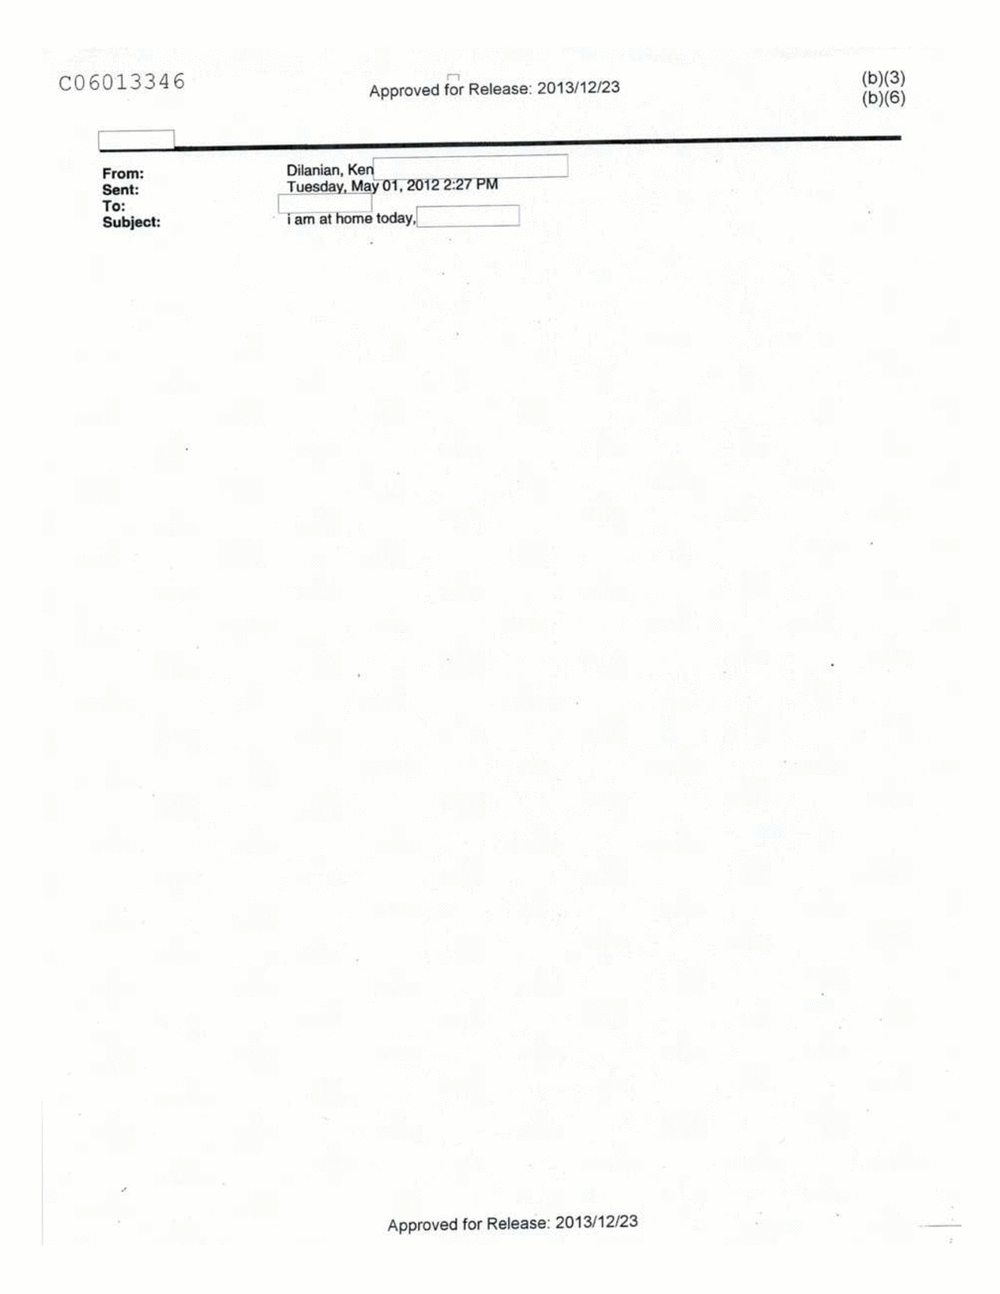 Page 253 from Email Correspondence Between Reporters and CIA Flacks